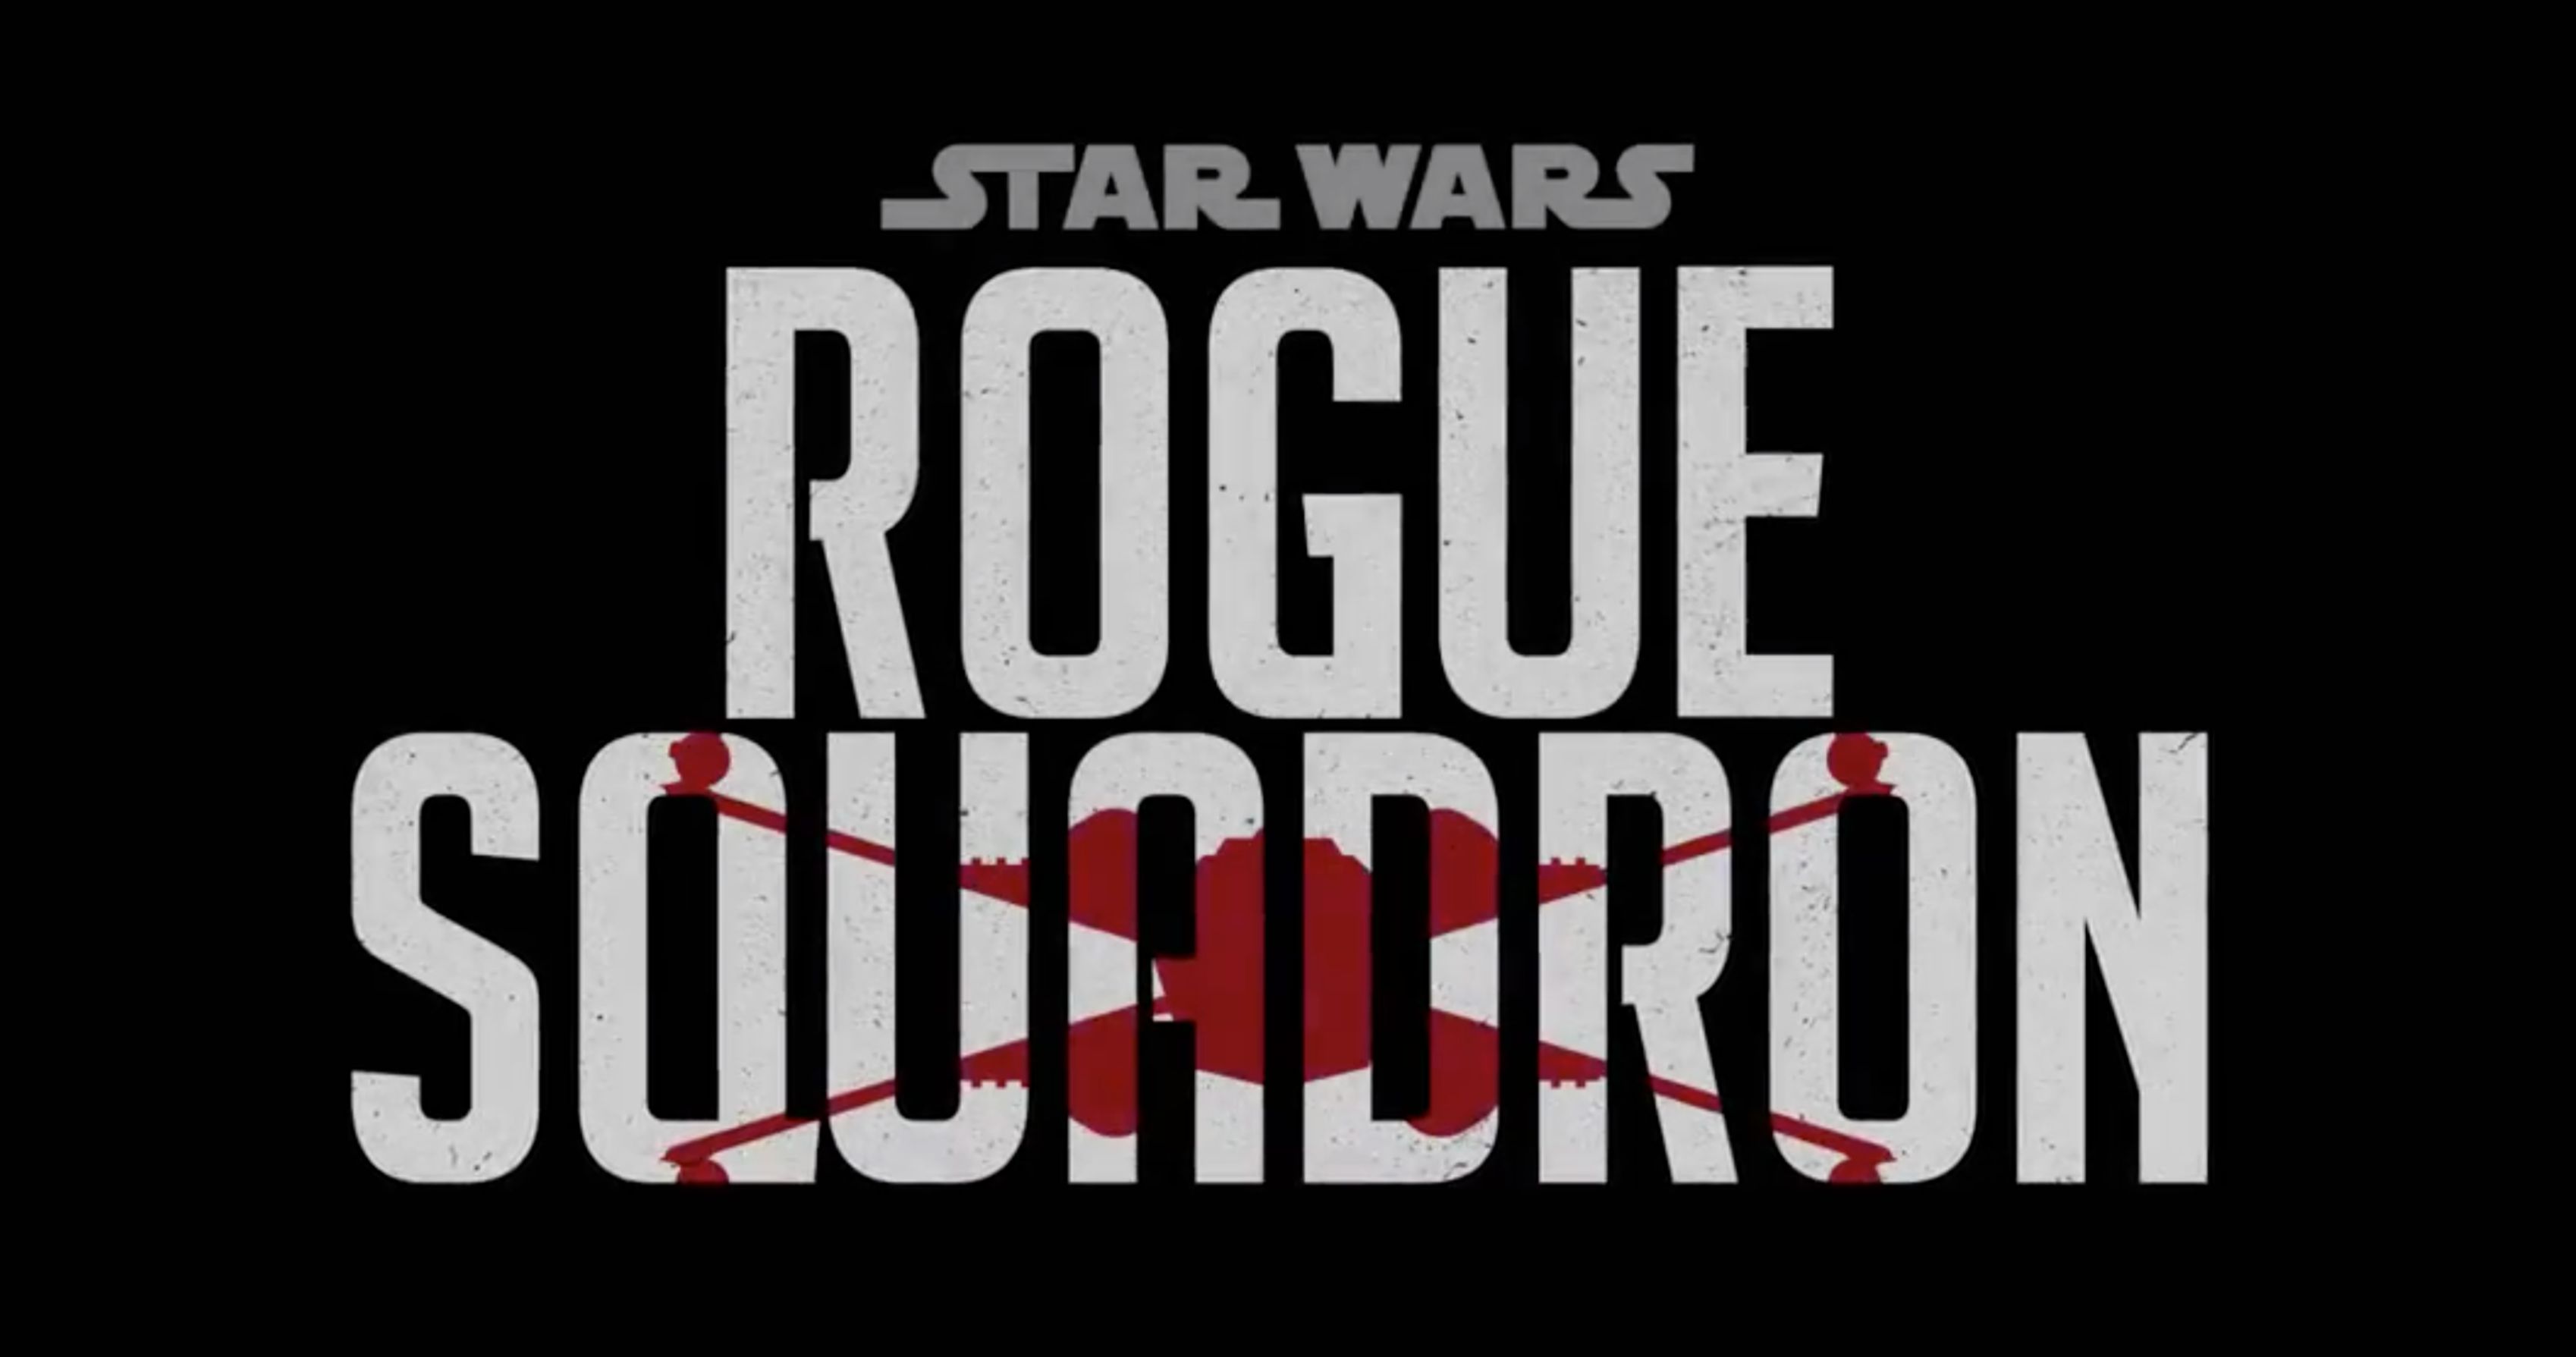 Star Wars: Rogue Squadron Movie Is Happening with Wonder Woman Director Patty Jenkins